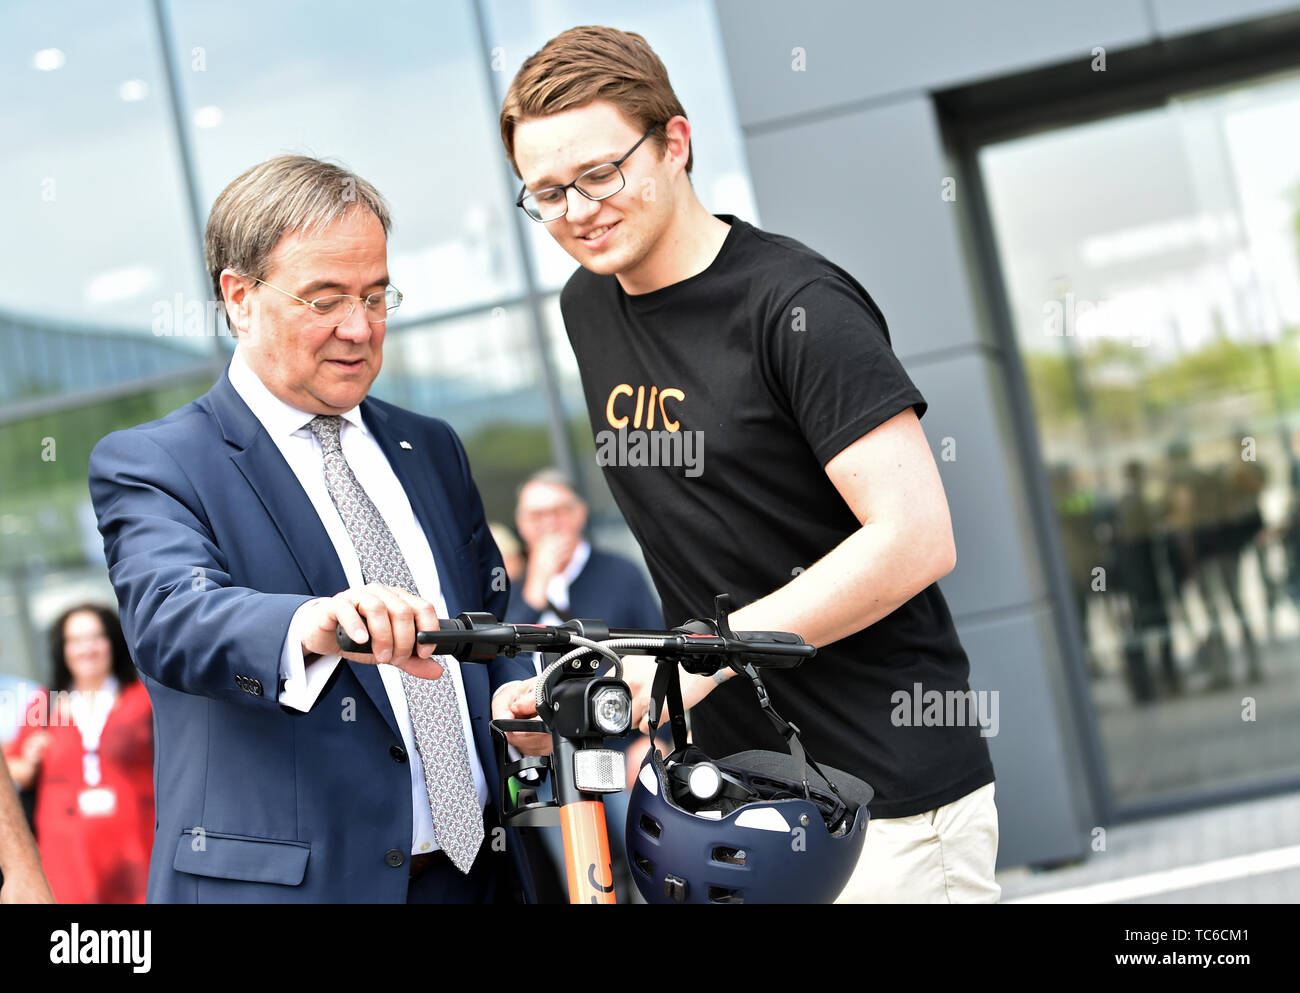 05 June 2019, North Rhine-Westphalia, Dortmund: Armin Laschet (CDU,l), NRW Minister President, has Daniel Hoppe von Circ explain an e-scooter to him after the Annual General Meeting of the German Association of Cities. Around 1300 delegates and guests meet for the Annual General Meeting which takes place every two years. Photo: Caroline Seidel/dpa Stock Photo